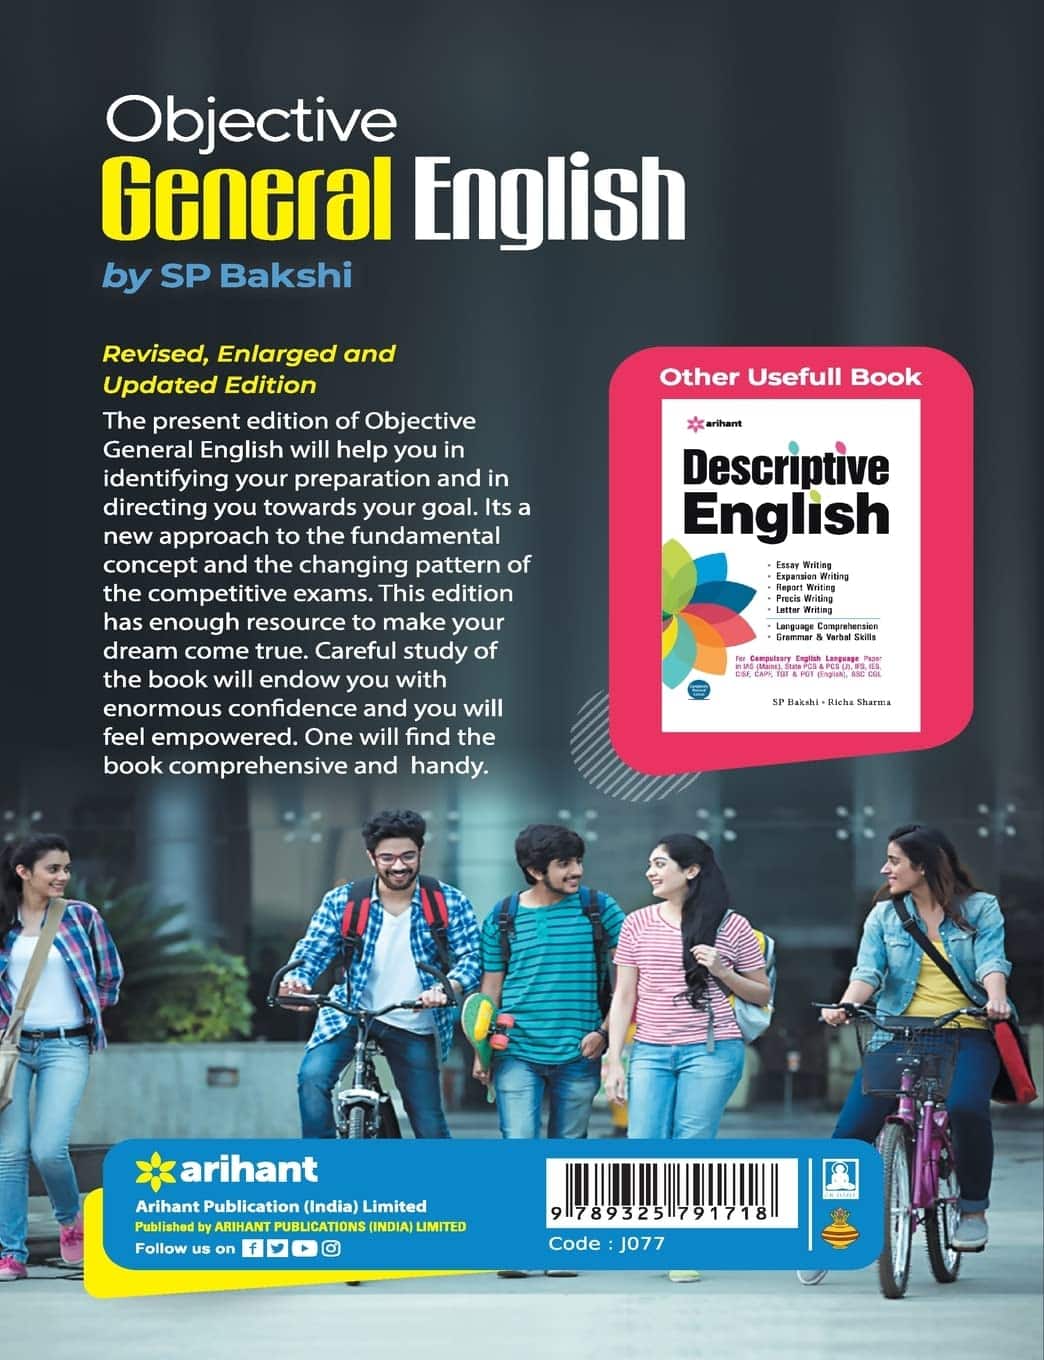 Objective General English back